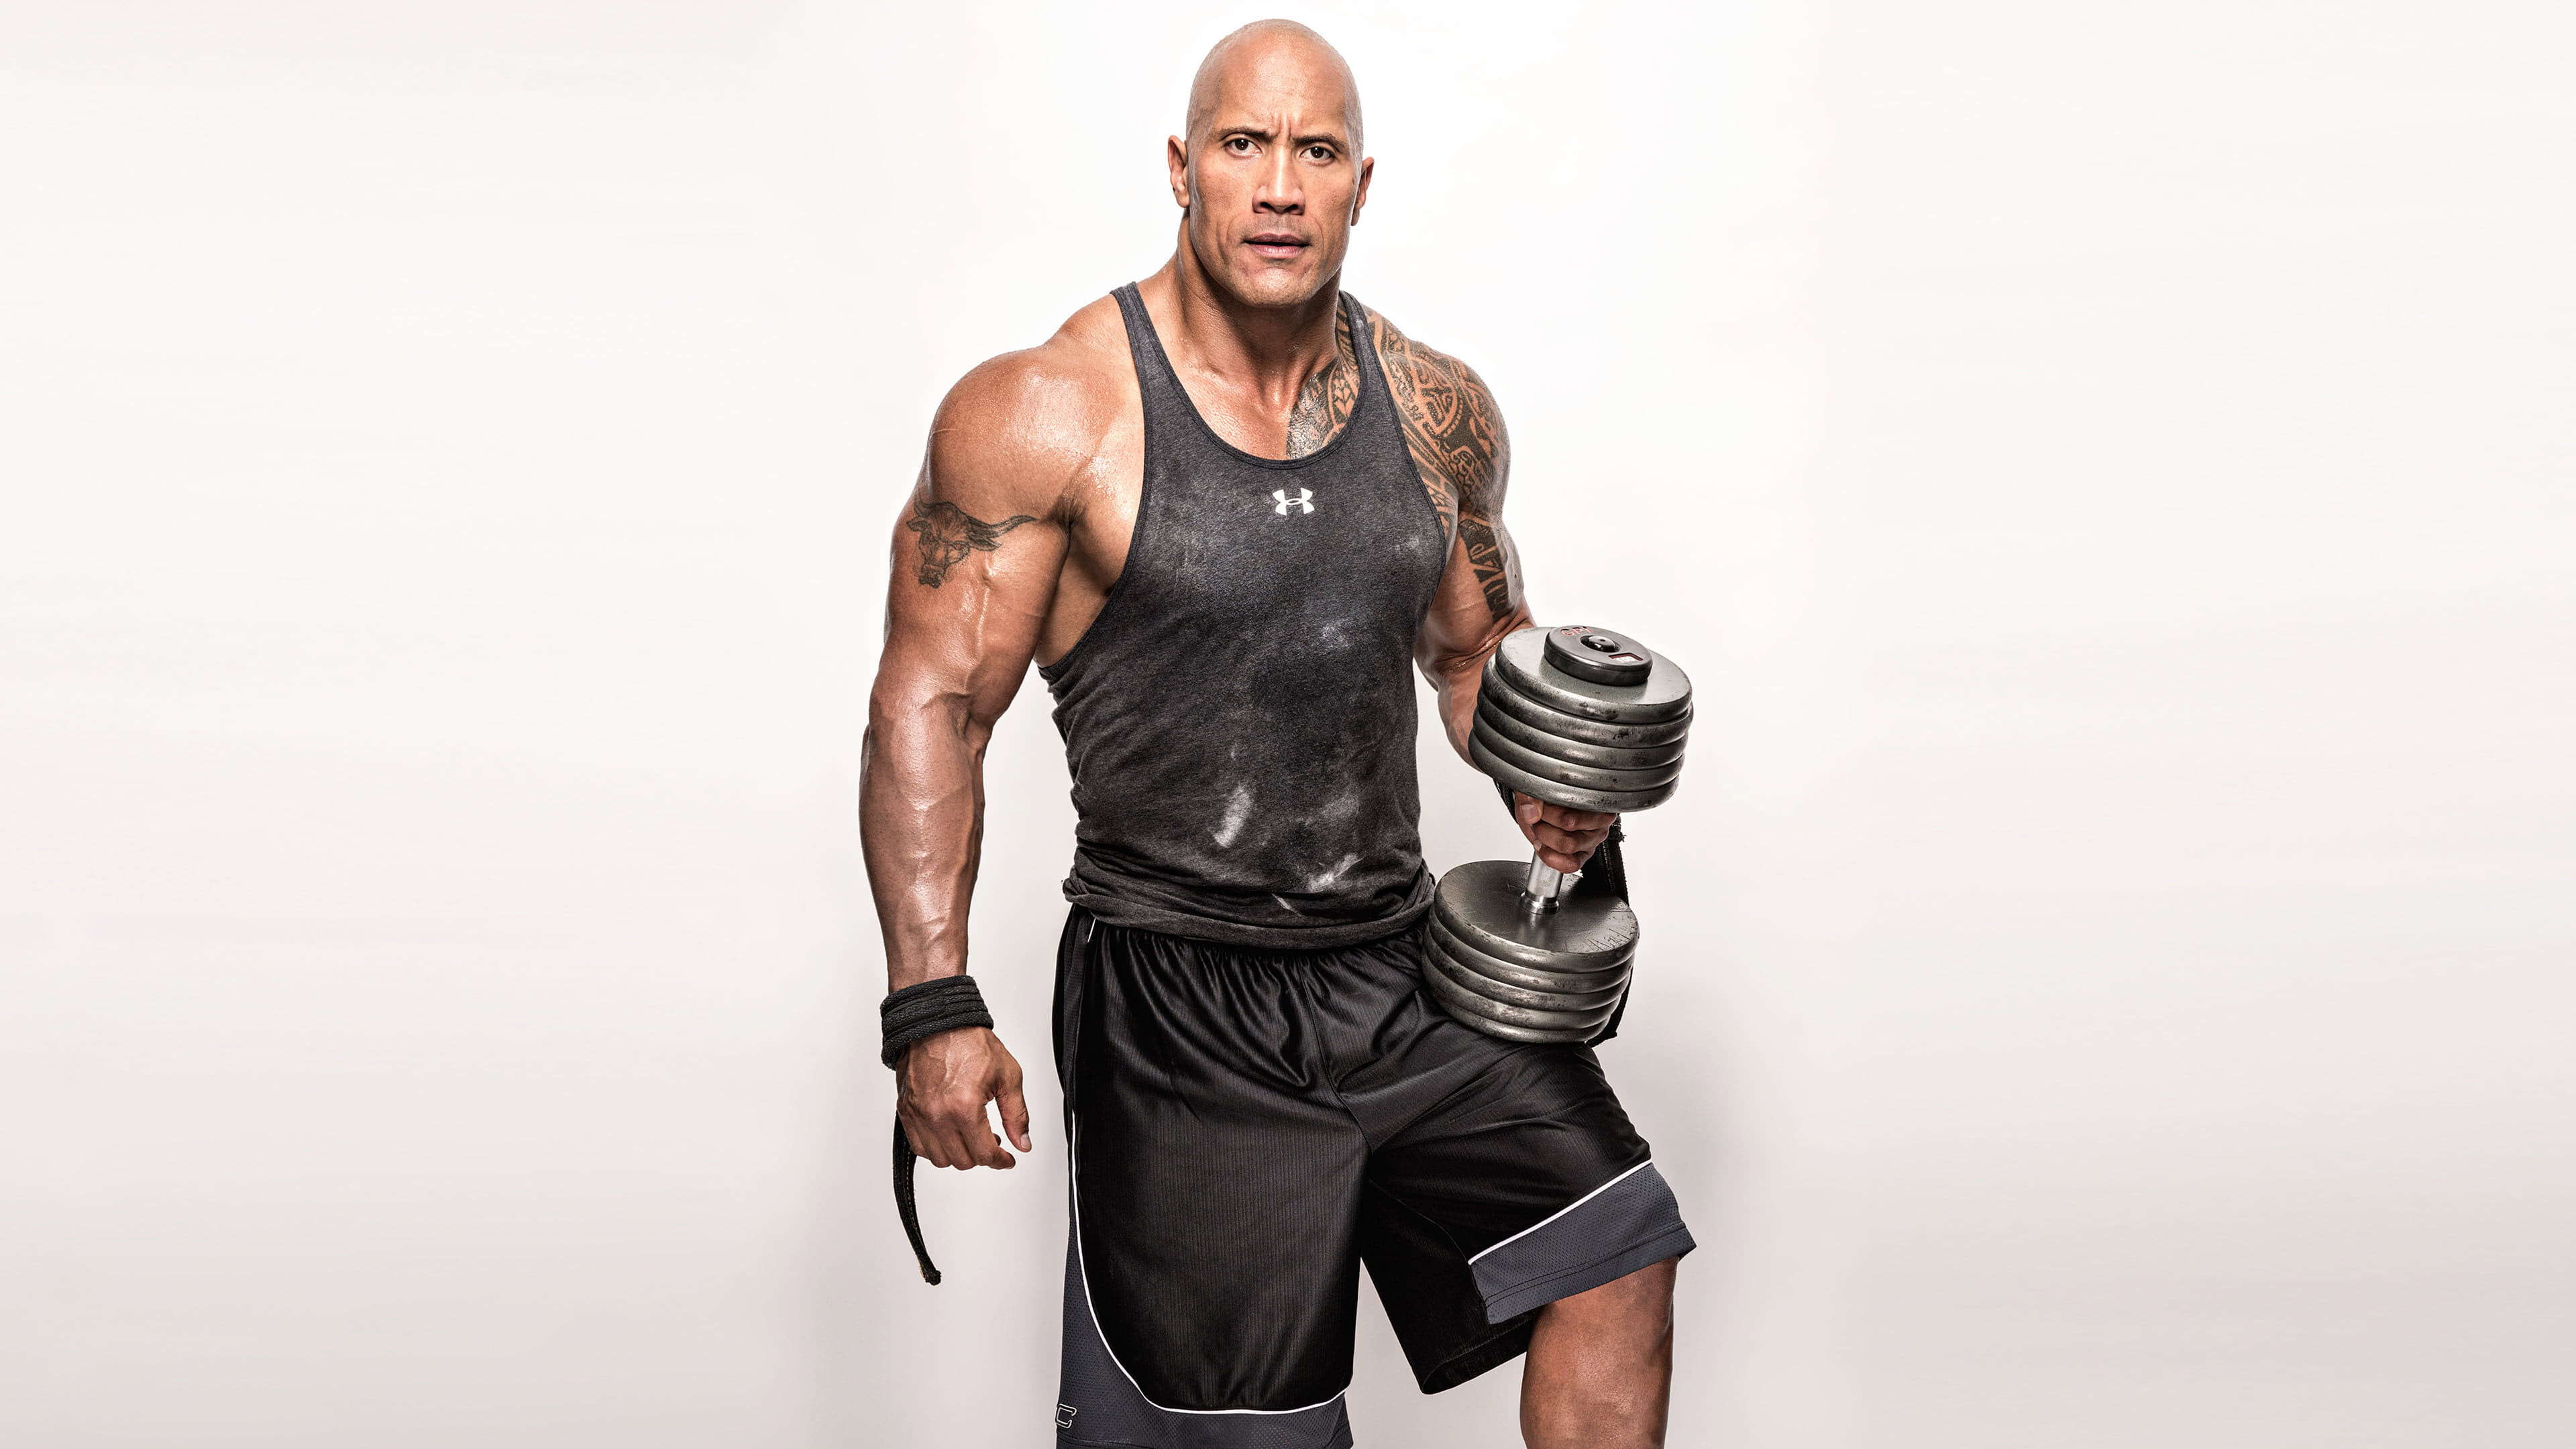 Dwayne Johnson: The Rock, Workout, An American actor and former professional wrestler. 3840x2160 4K Background.